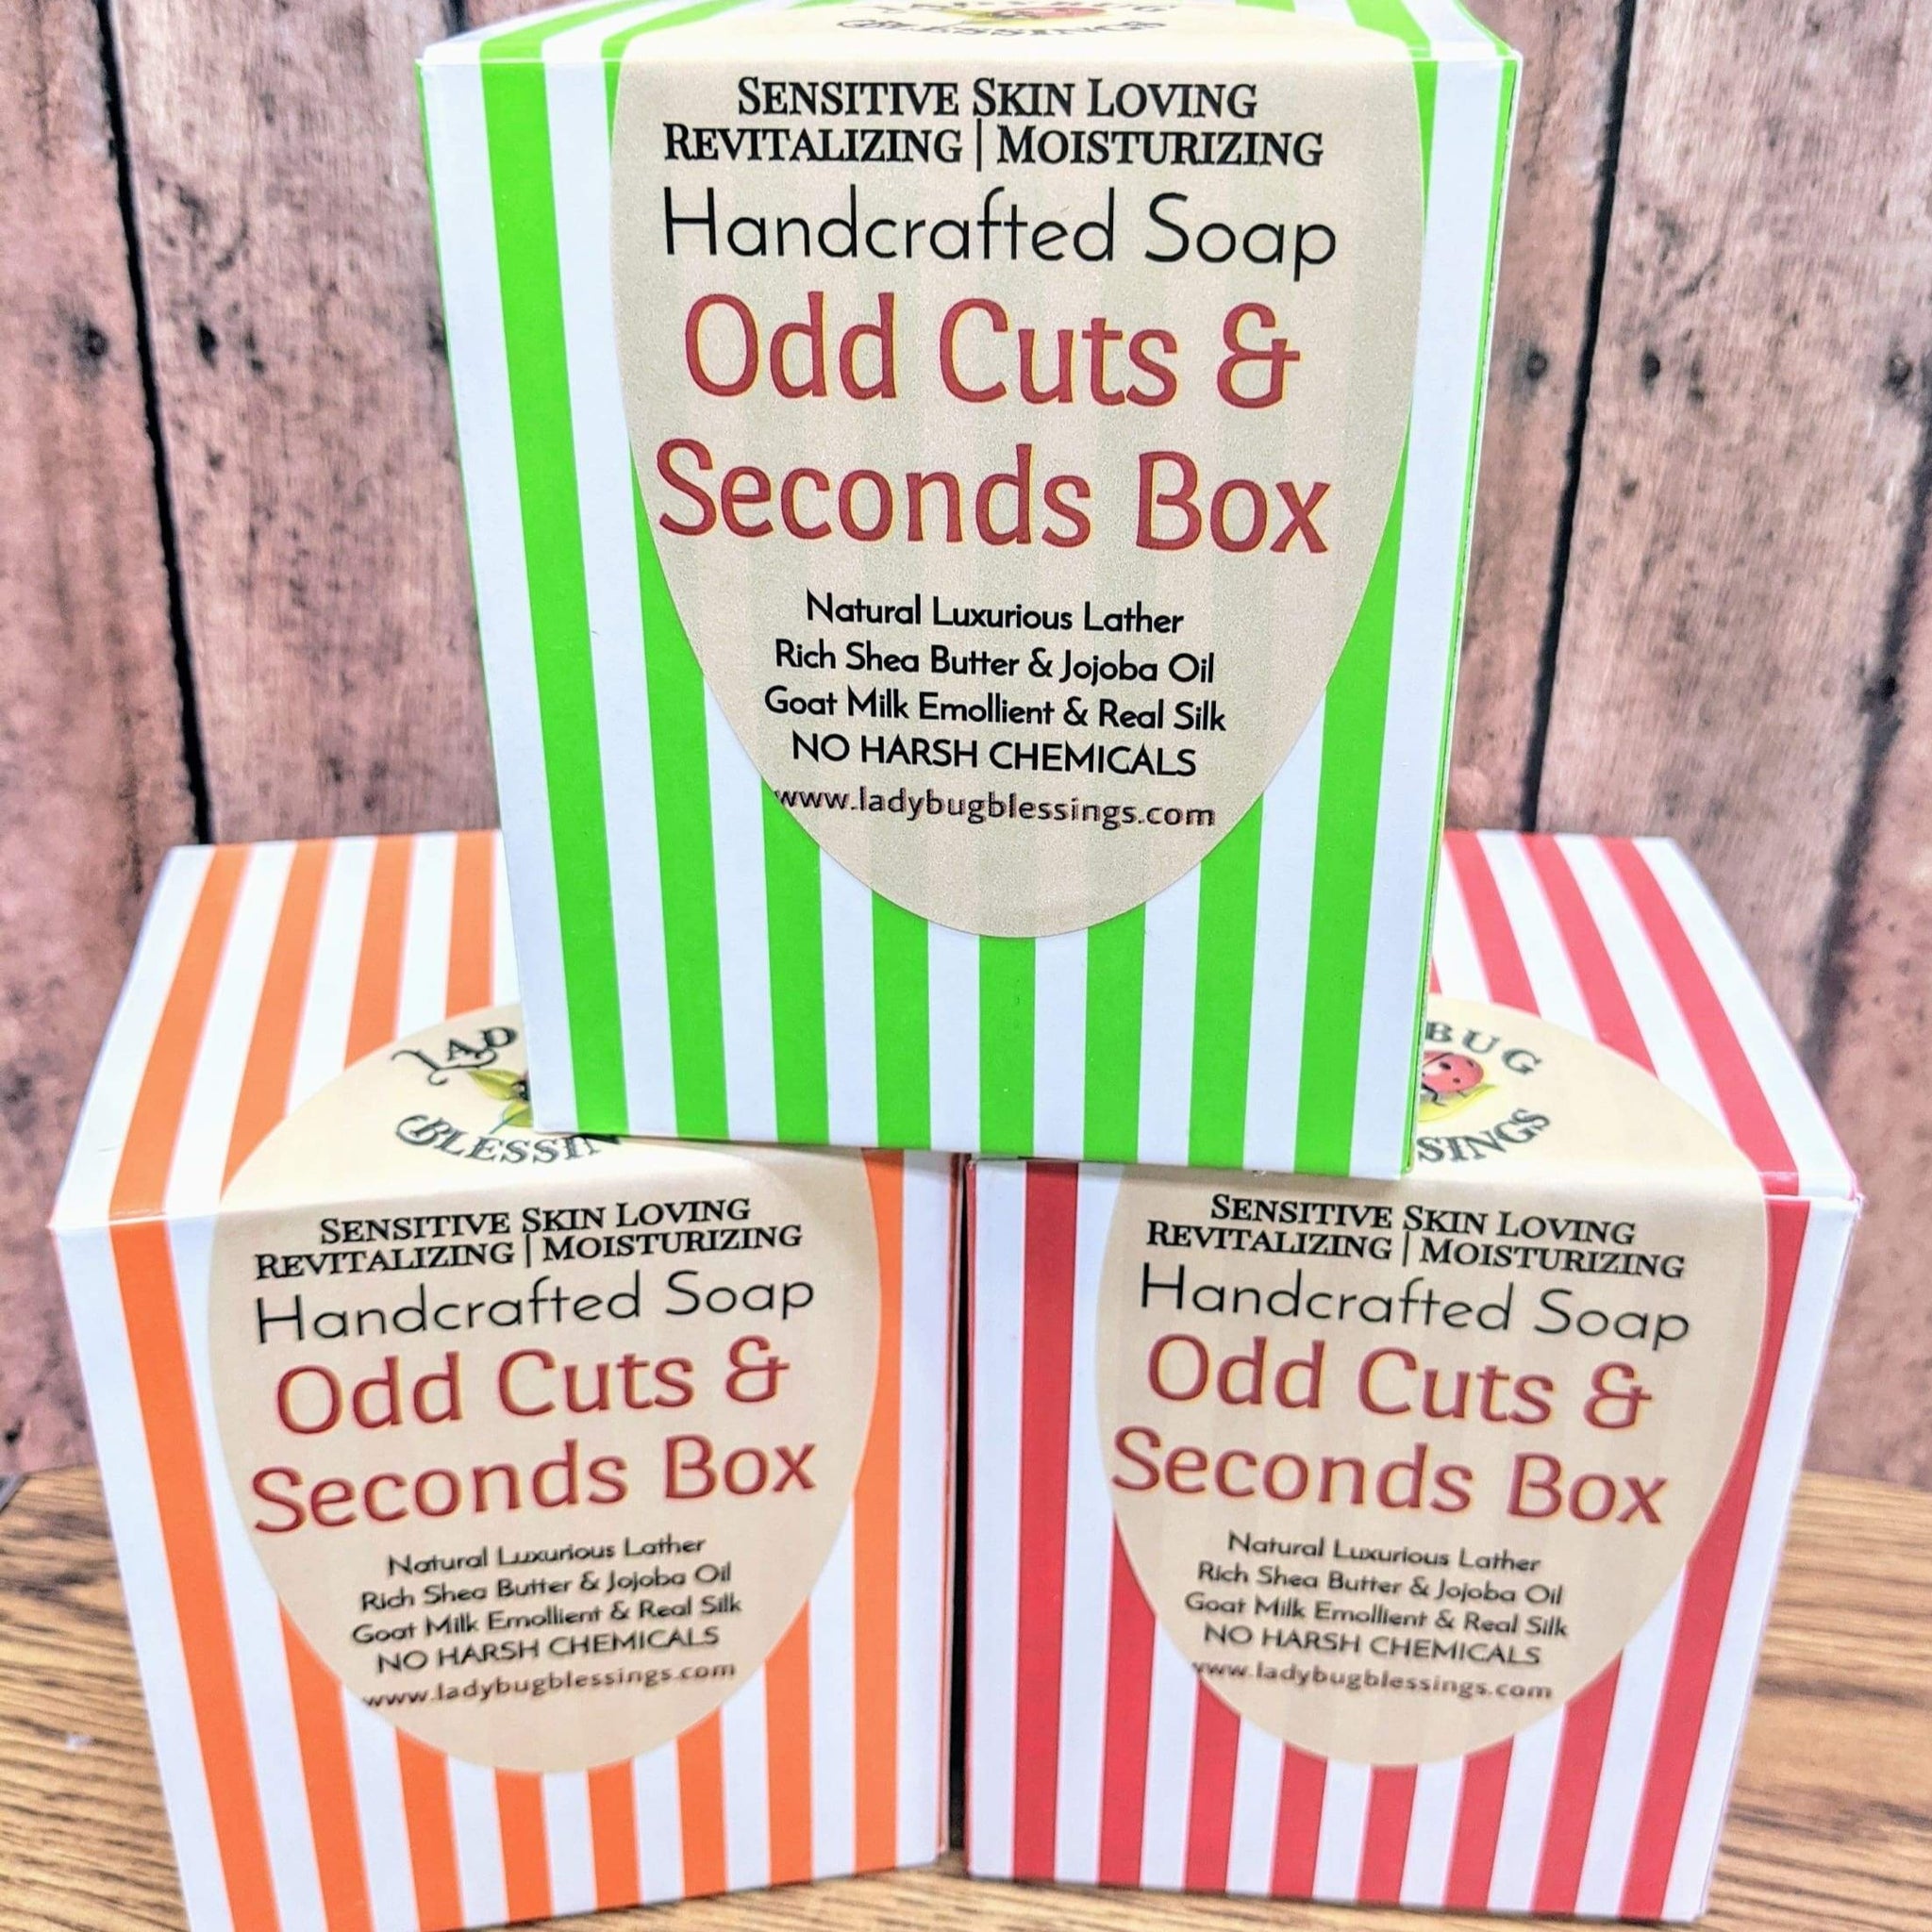 Handcrafted Soap - Ends & Odd Cuts discount Mystery Box!